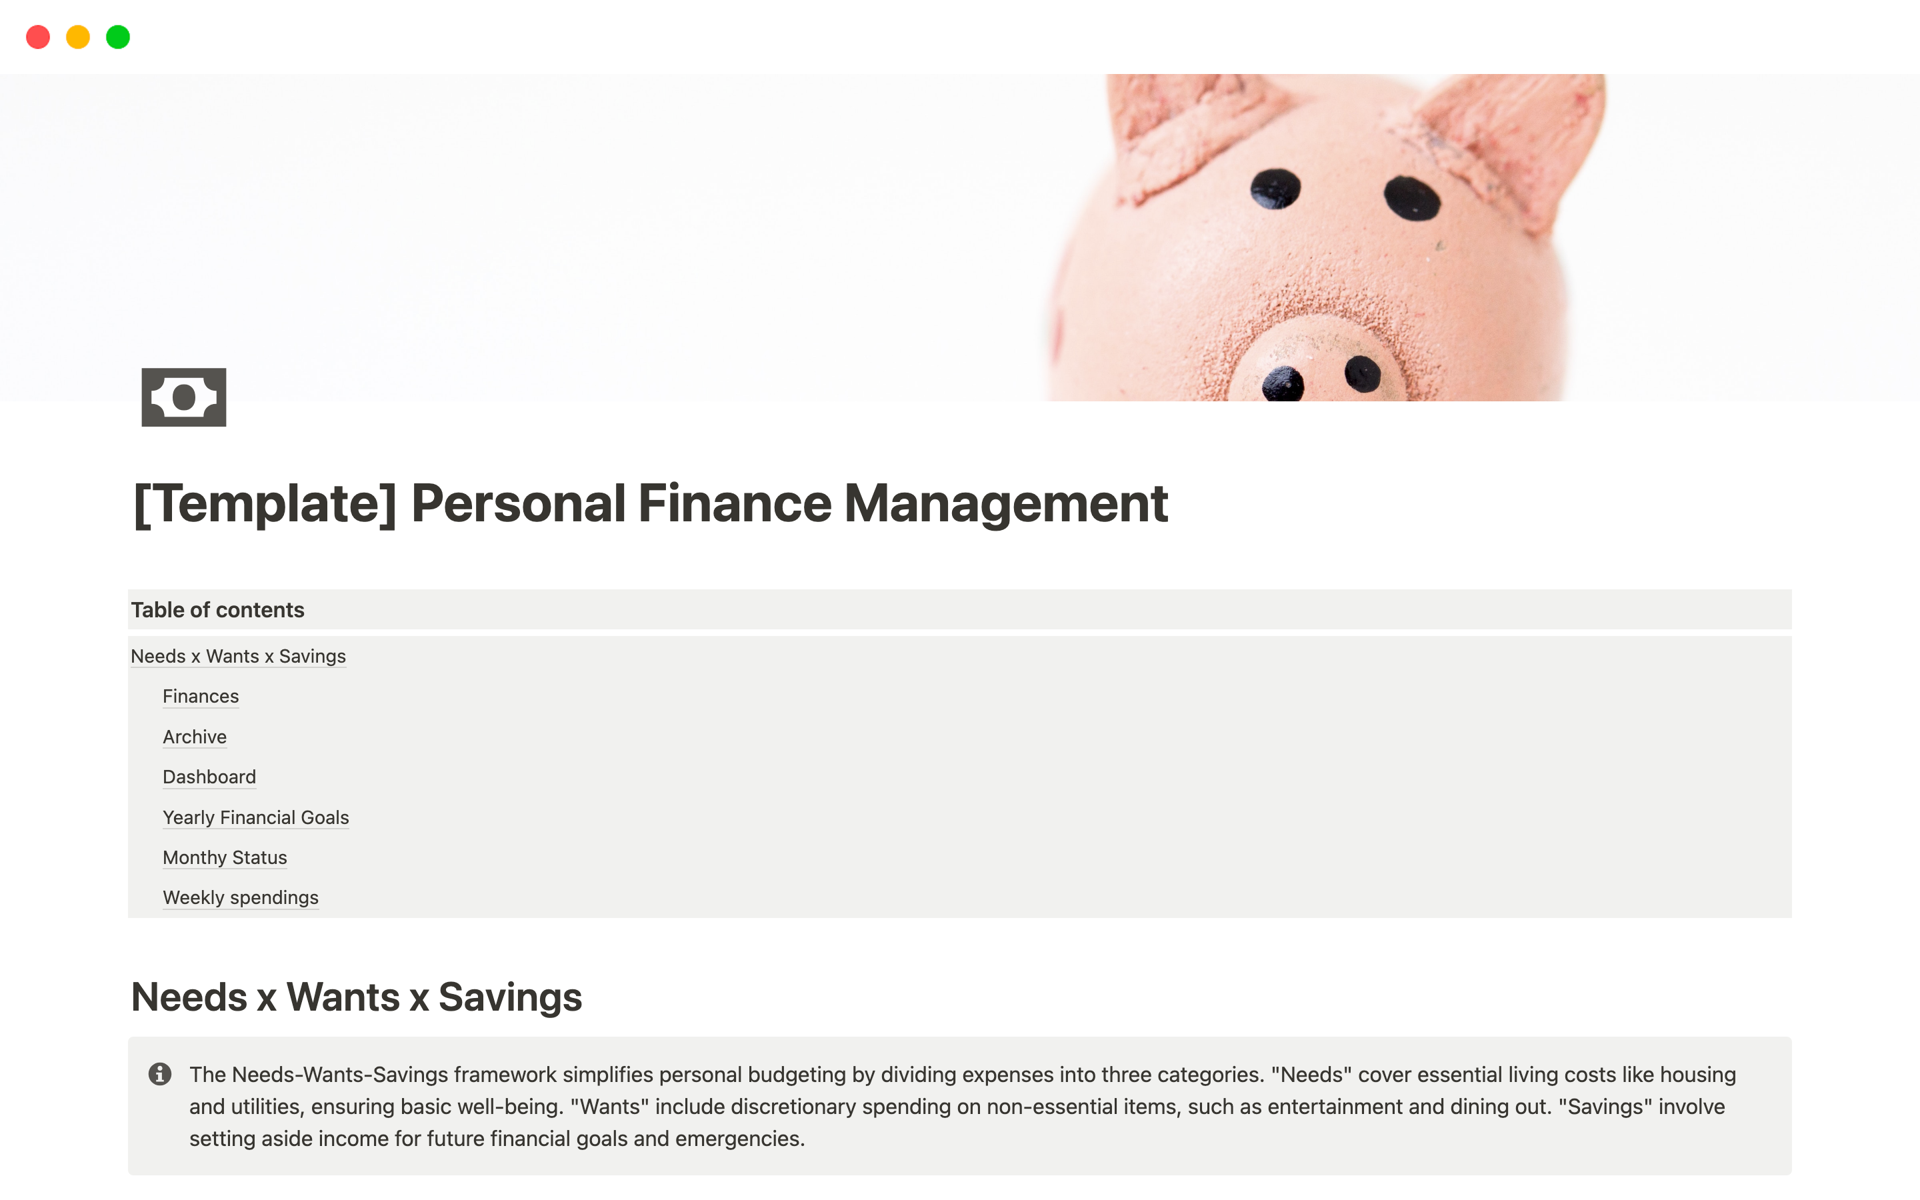 This template helps personal finance management.